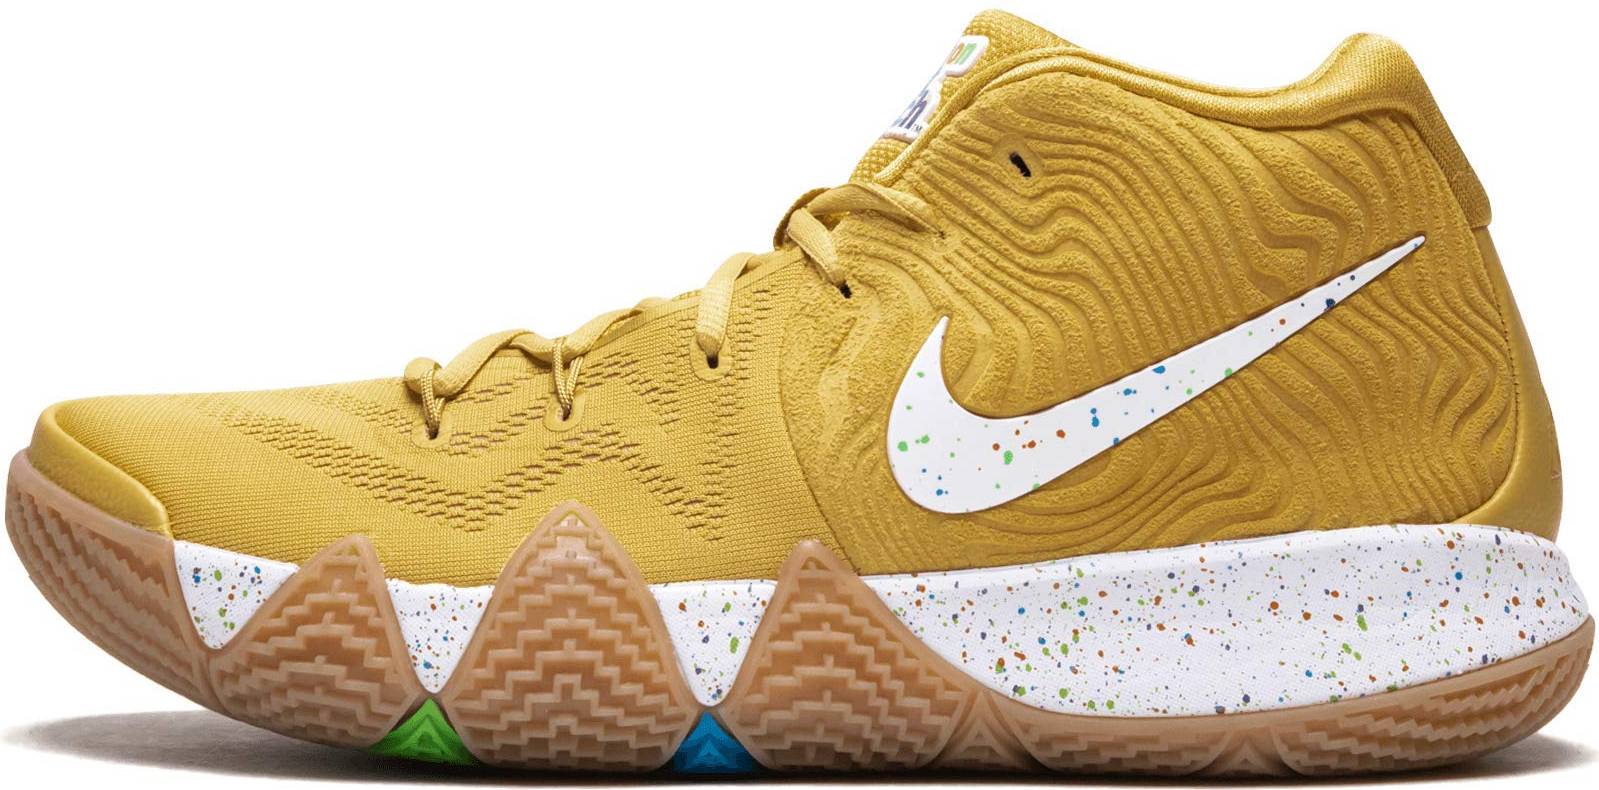 white and gold basketball shoes